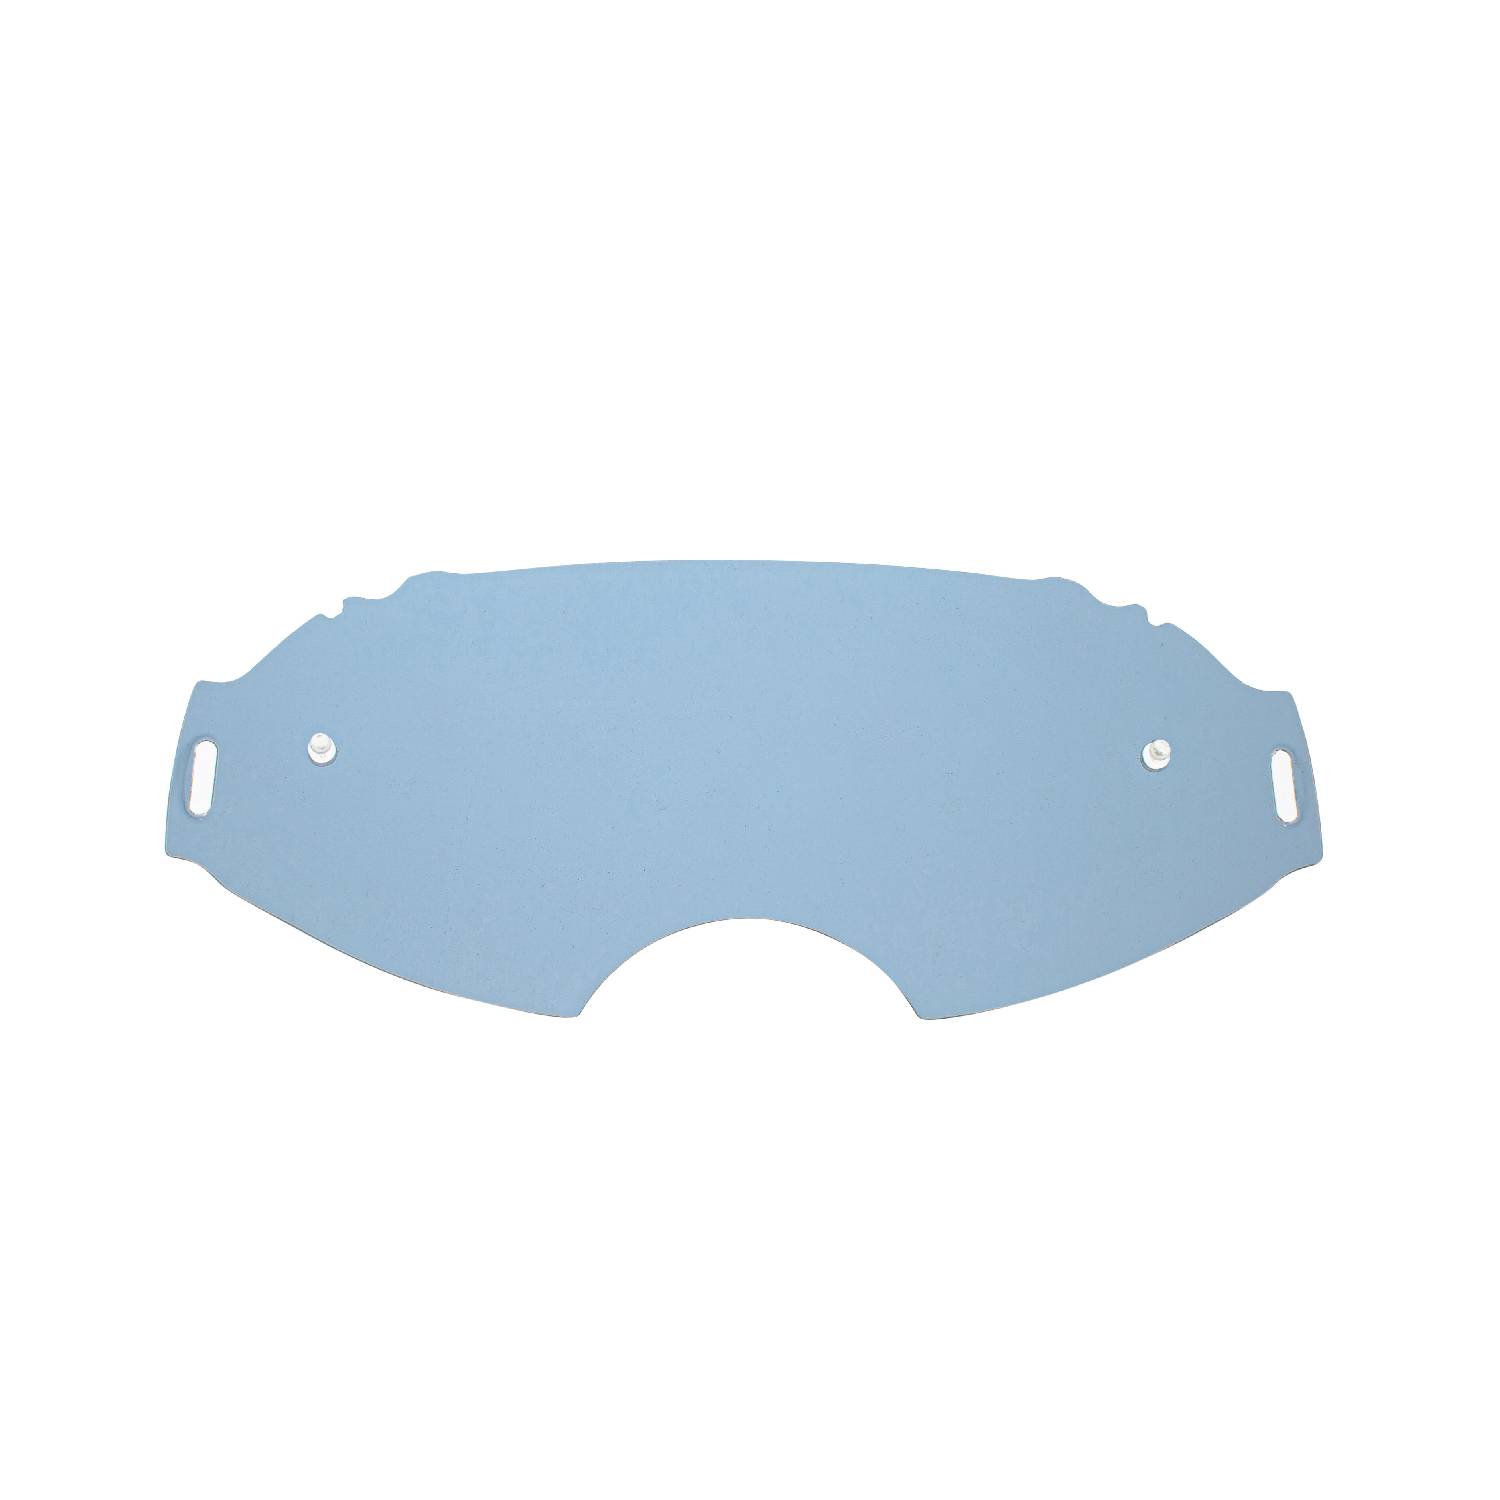 ROLL-OFF lenses with smokey lenses compatible for Oakley Airbrake Flat goggle